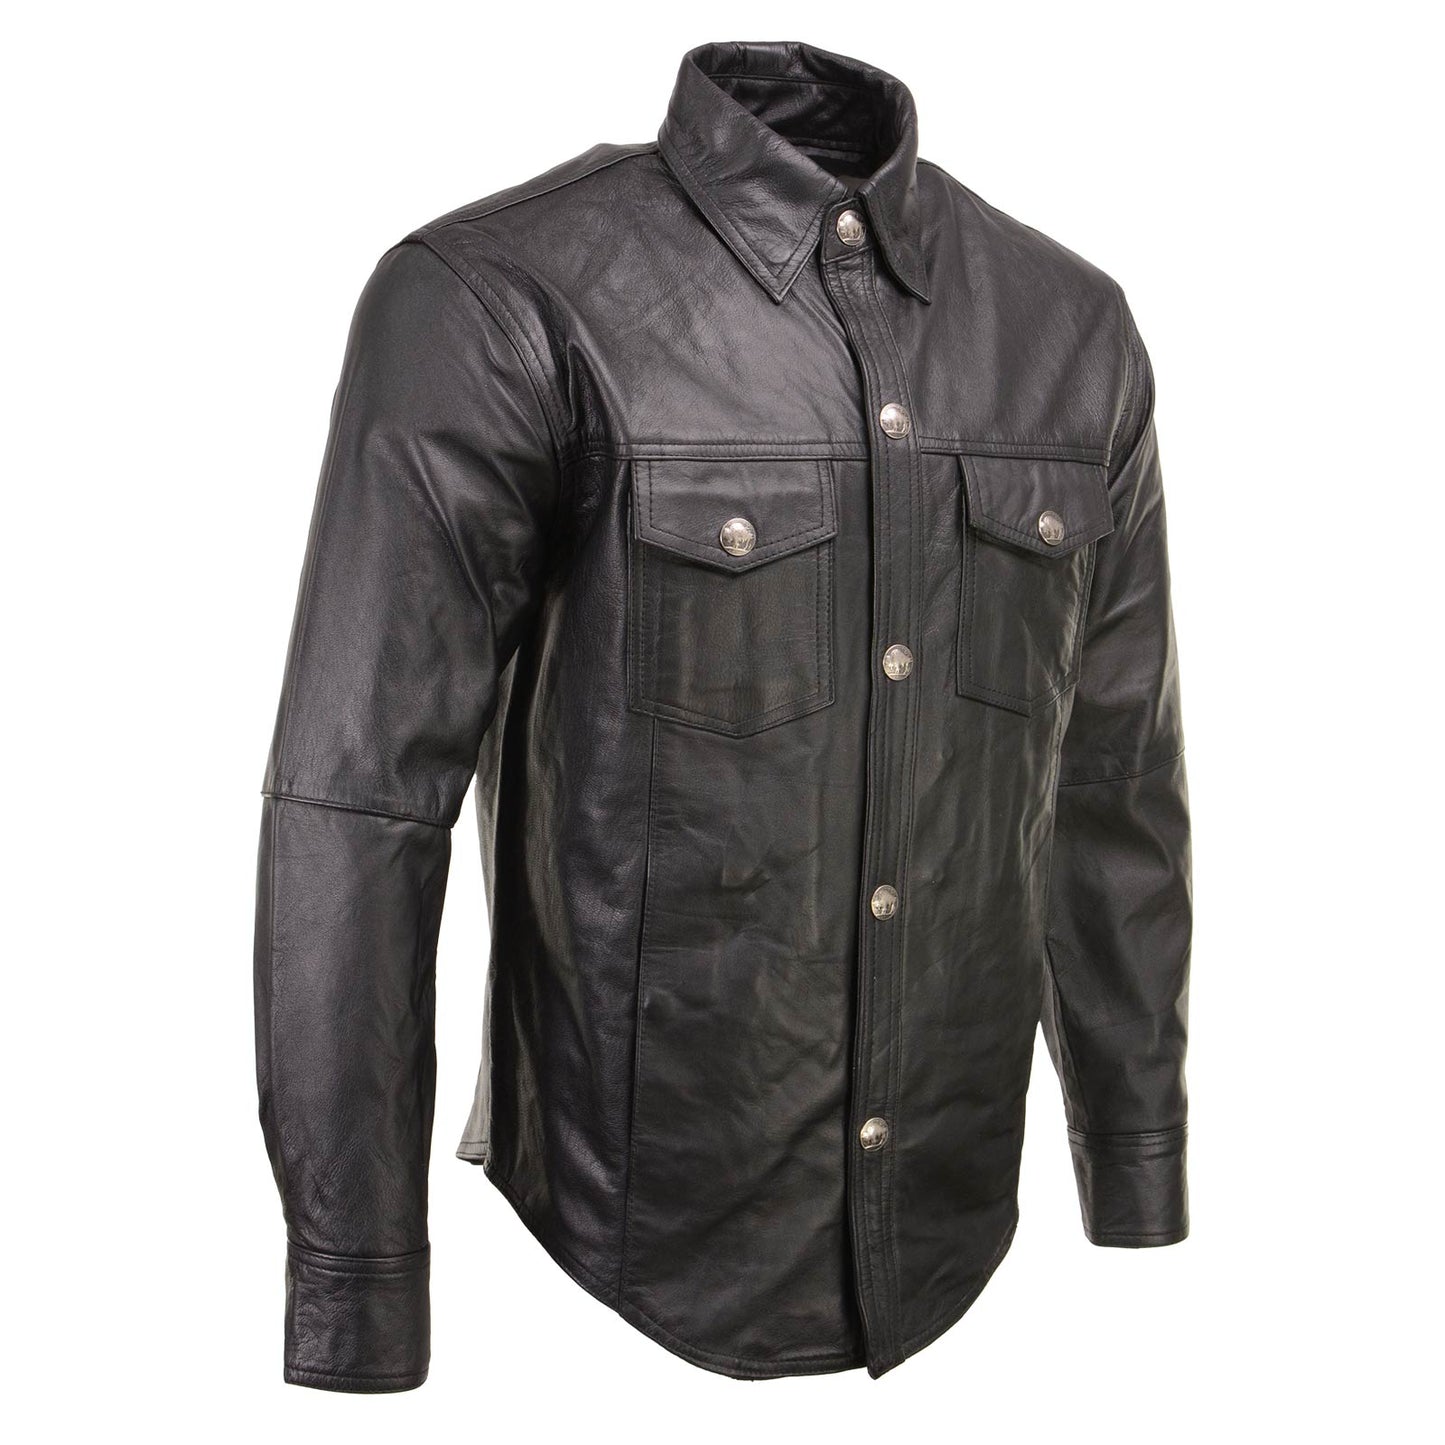 Xelement XS908B Men's 'Nickel' Black Leather Casual Biker Rider Shirt with Vintage Buffalo Buttons